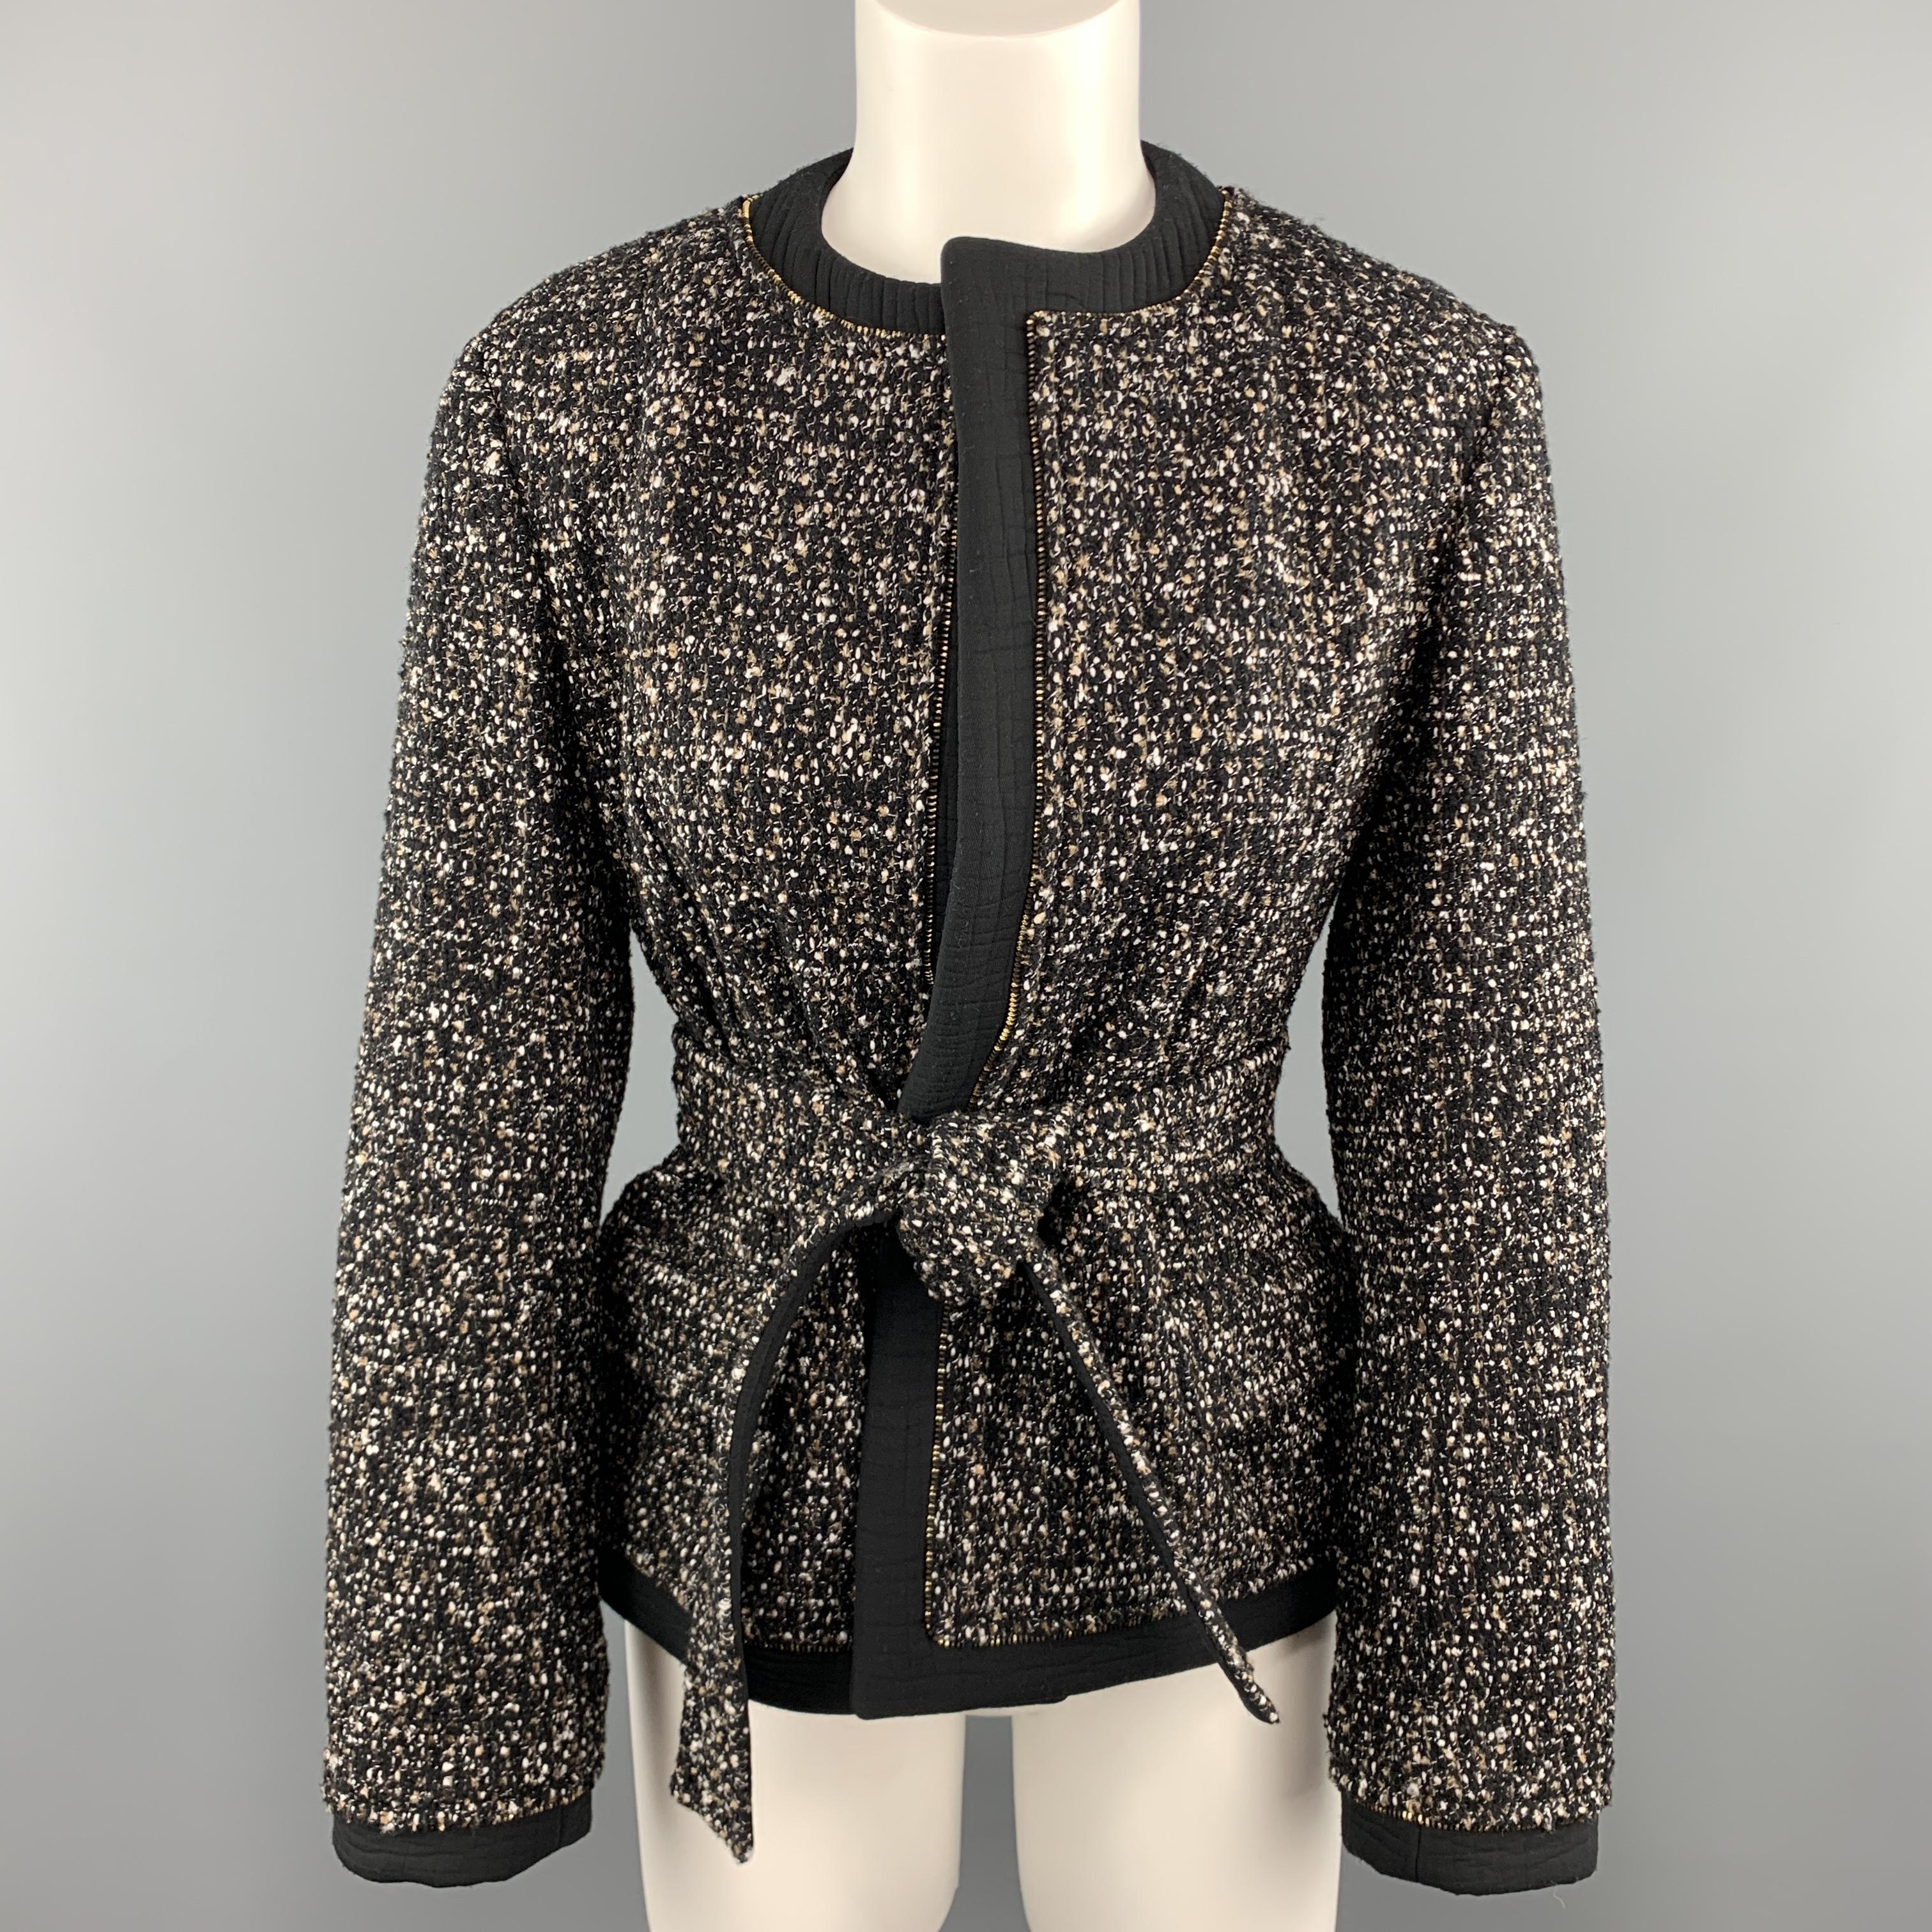 YVES SAINT LAURENT jacket comes in a tan and black wool blend tweed with a cropped hourglass silhouette, round, collarless neckline, flap pockets, black crocodile fabric textured trim, tie waistband, and zipper piping. Made in France.

Excellent